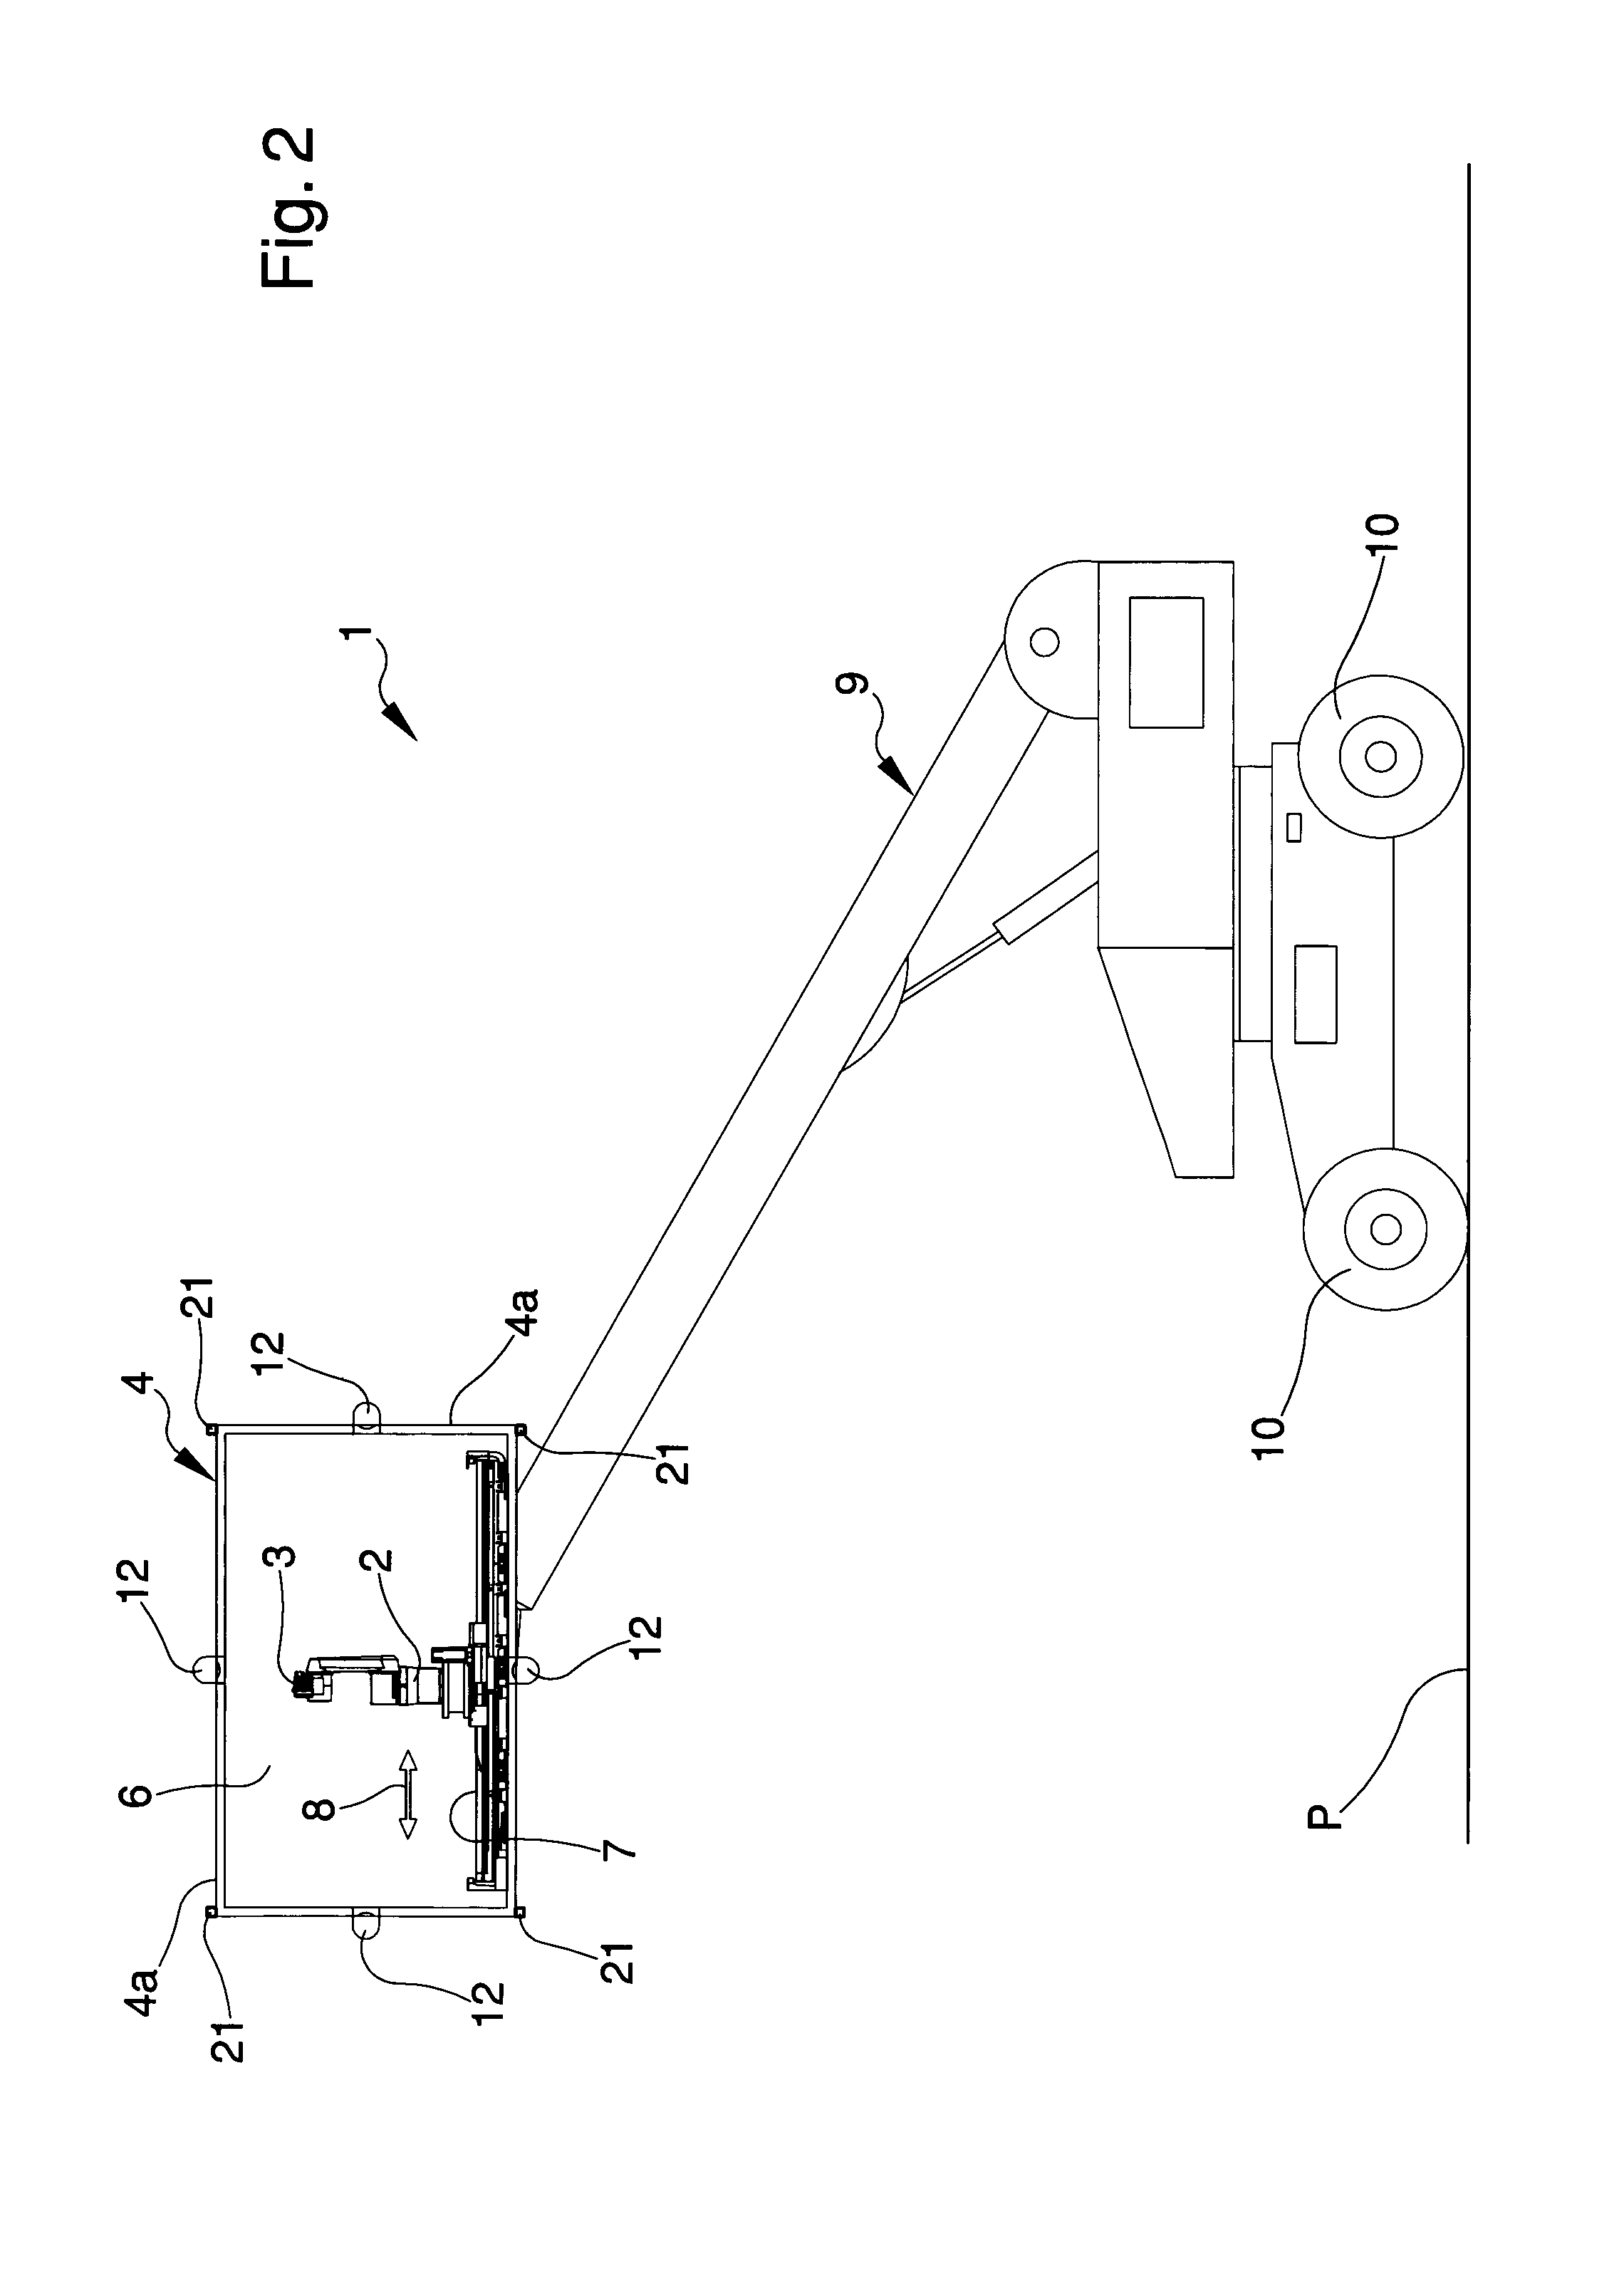 Apparatus and method for the painting of hulls of boats or the like